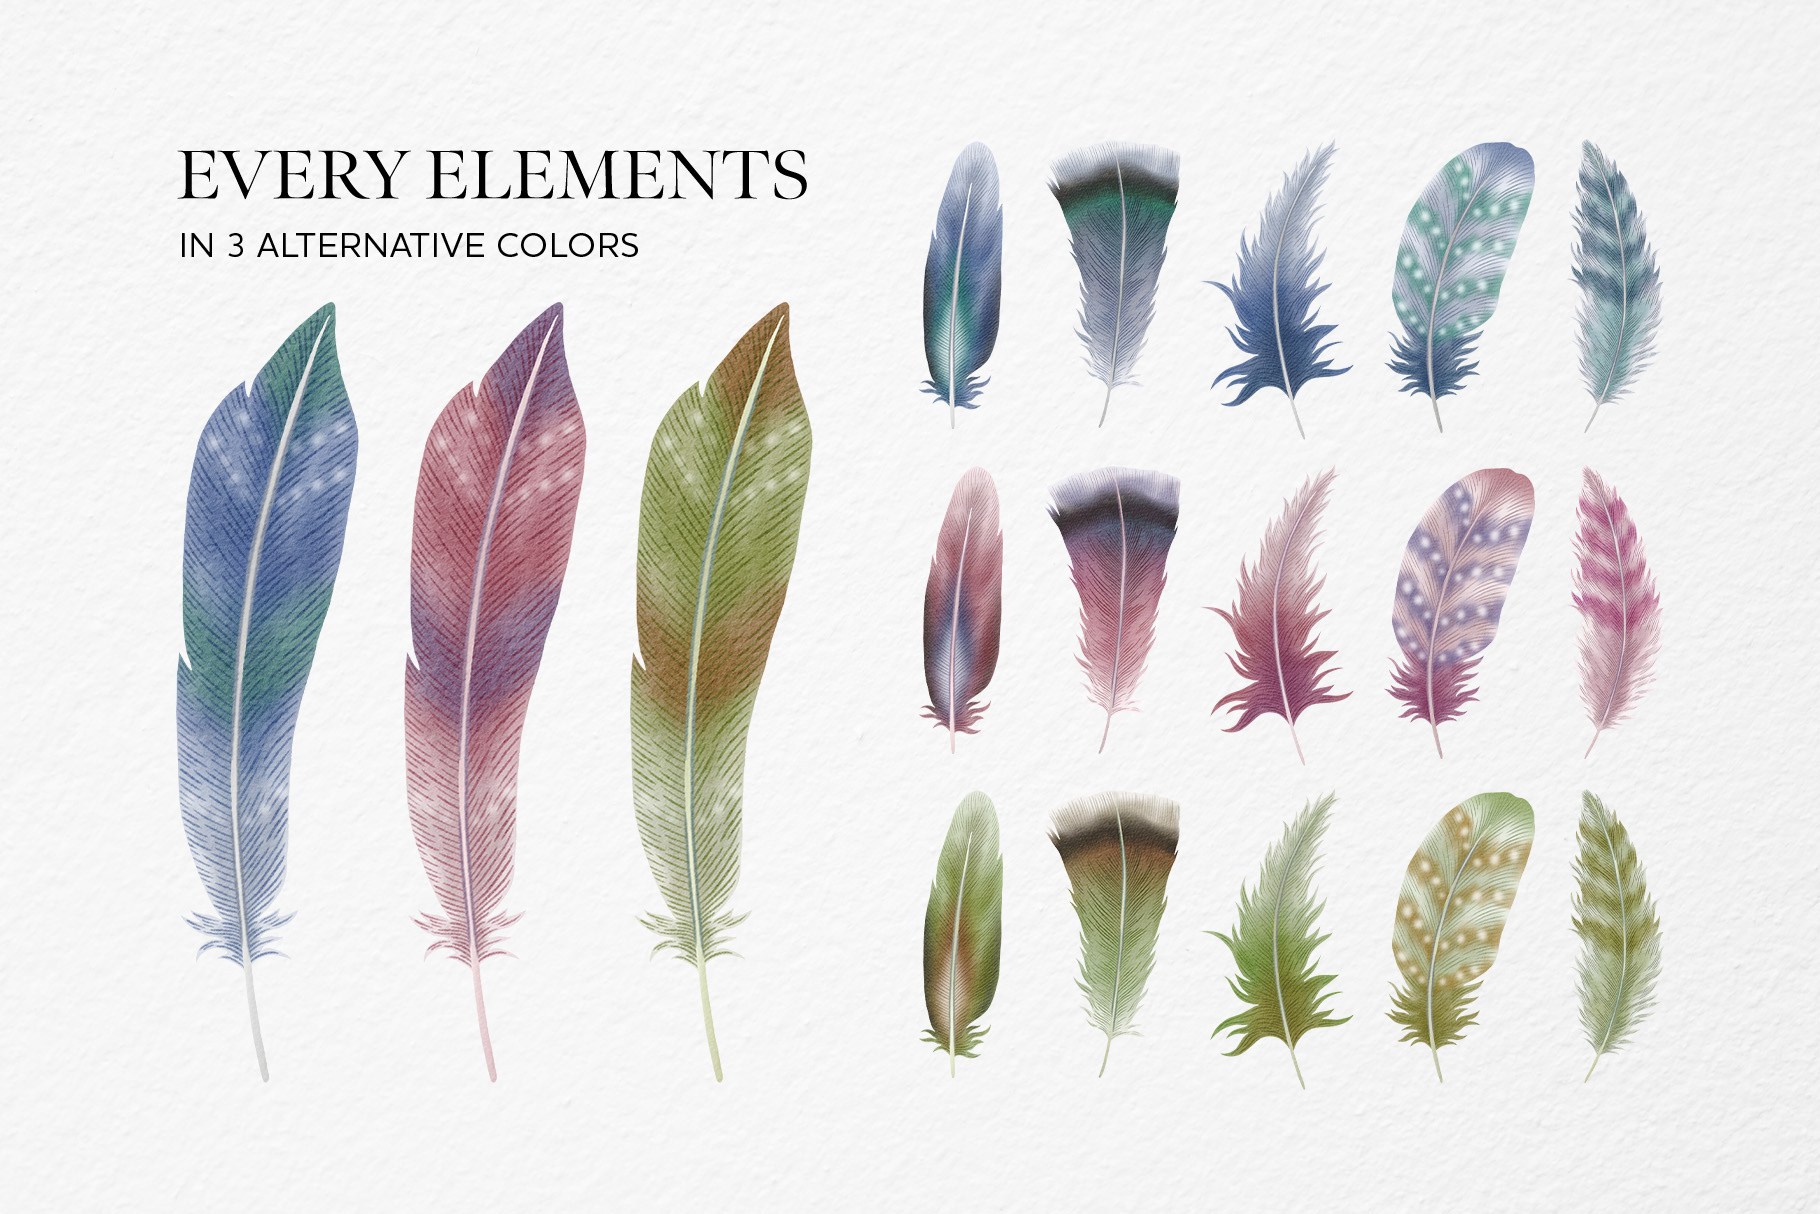 Feathers Watercolor Clipart (PSD, PNG, PAT Format)